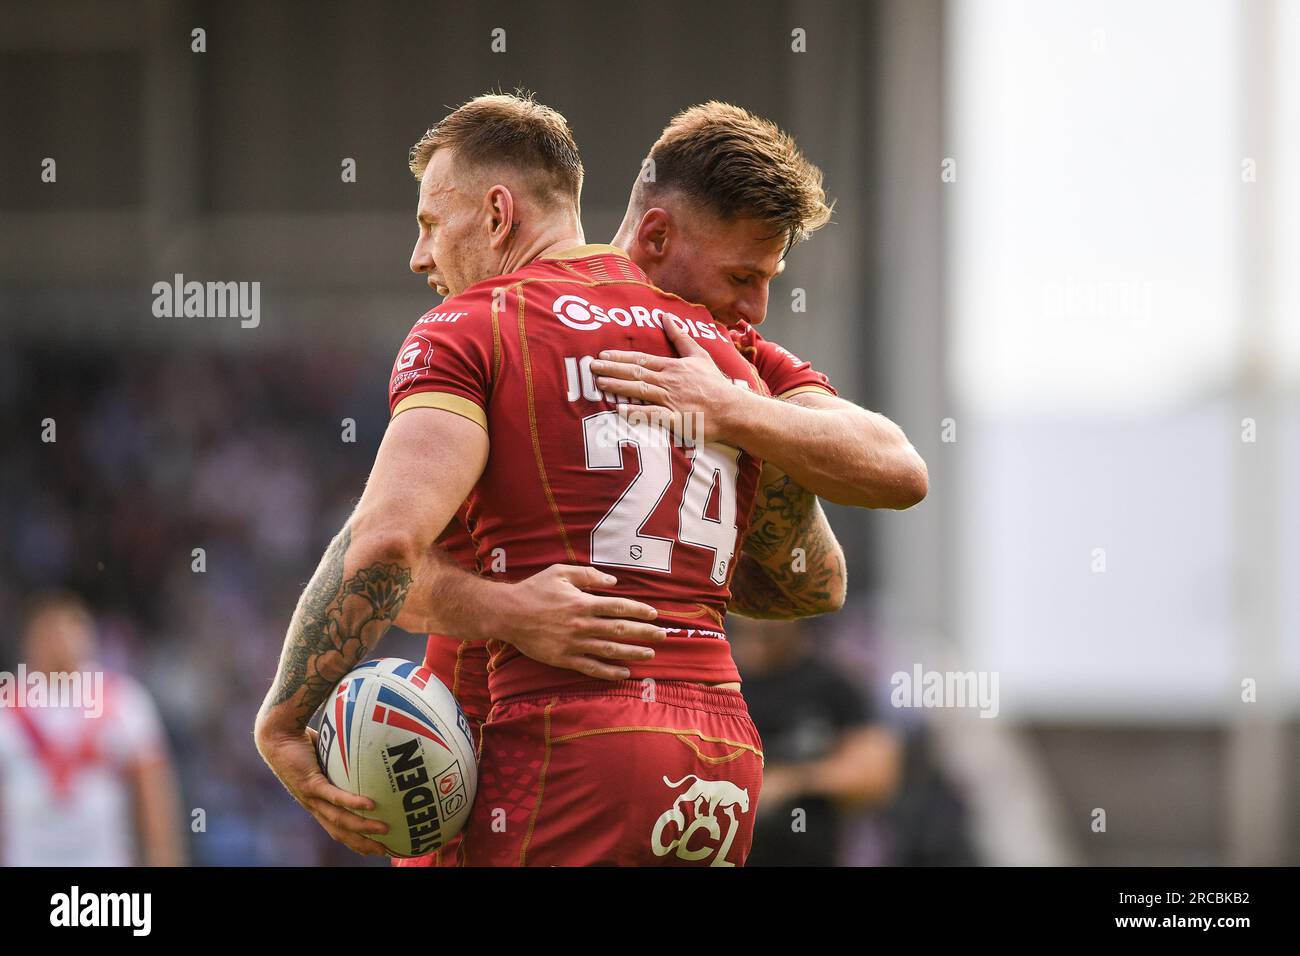 St. Helens, Angleterre - 13 juillet 2023 - Tom Davies de Catalan Dragons et Tom Johnstone de Catalan Dragons célèbrent Try. Betfred Super League, St. Helens vs Catalan Dragons au Totally Wicked Stadium, St. Helens, Royaume-Uni Banque D'Images